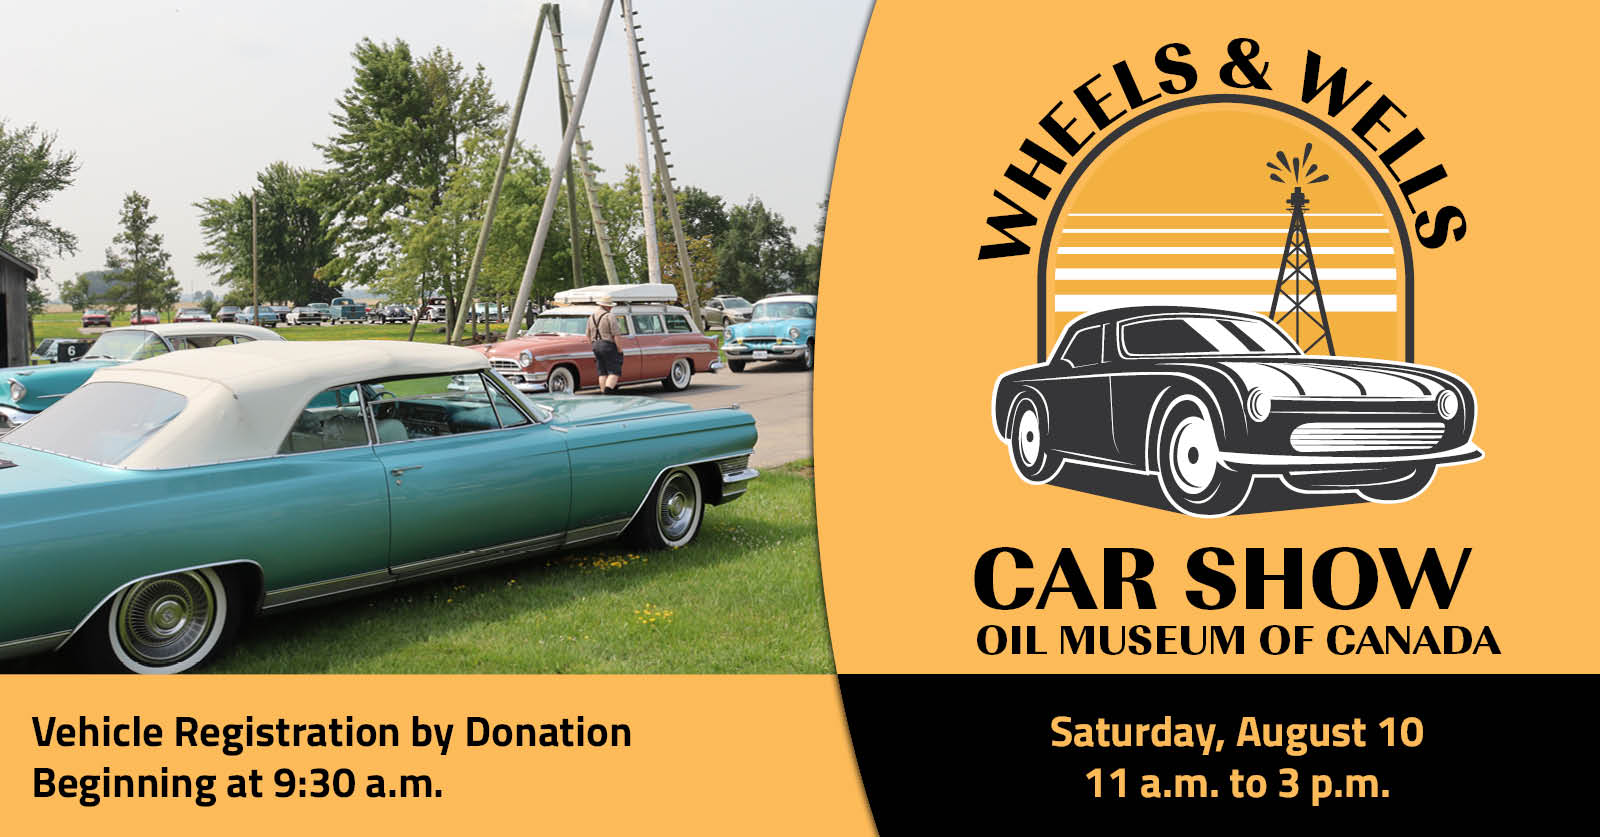 Old fashioned cars on the grounds of the Oil Museum of Canada with event details included in text